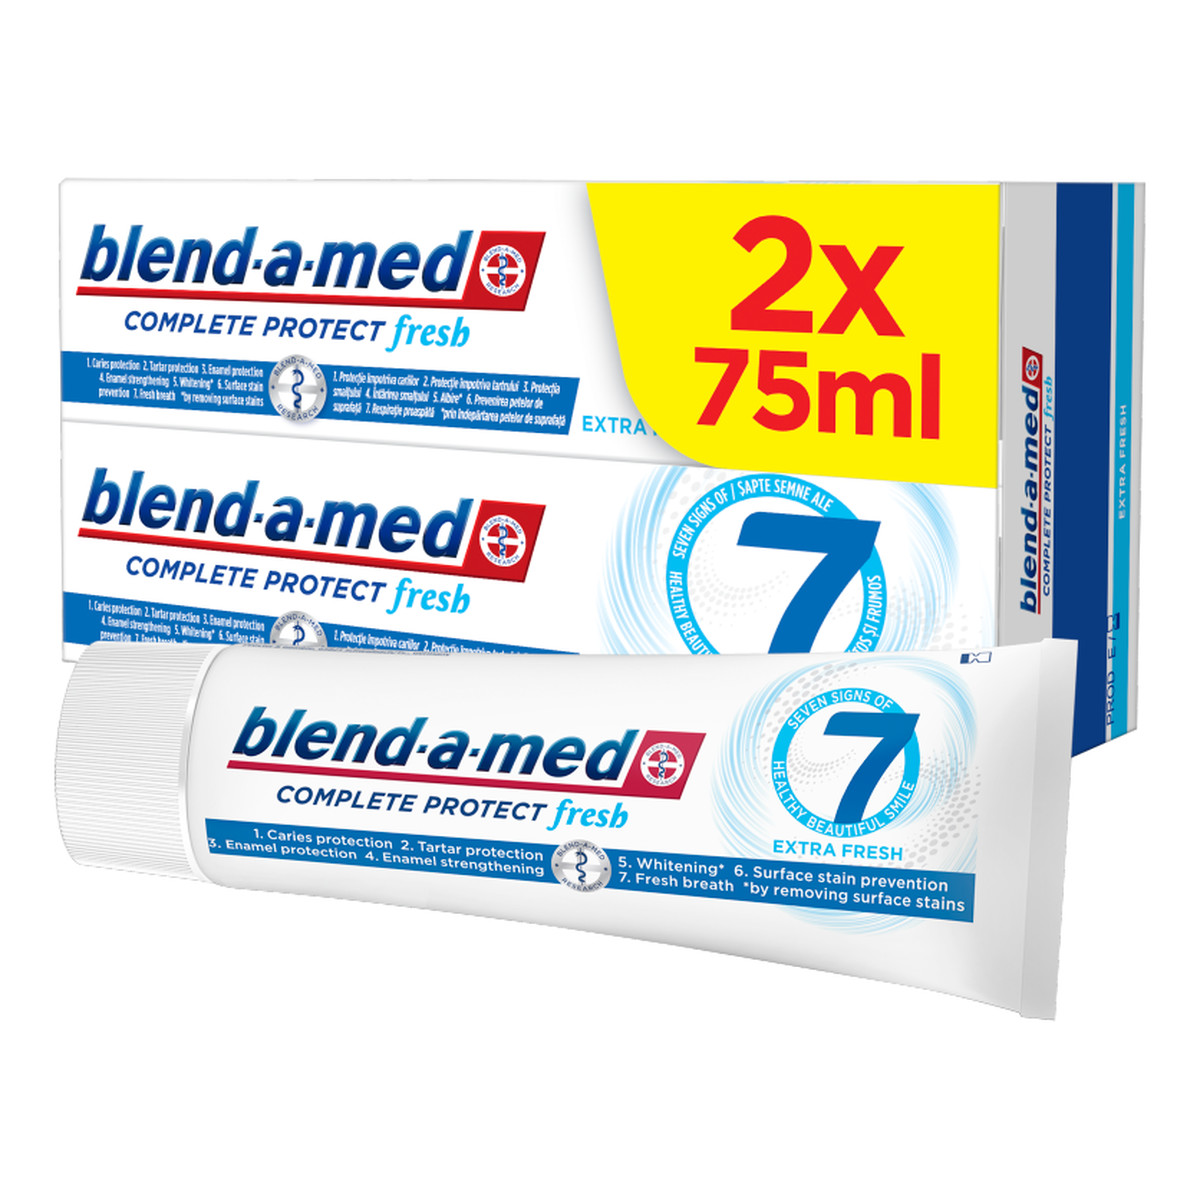 Blend-a-med Complete Protect 7 Pasta do zębów Extra Fresh 75ml